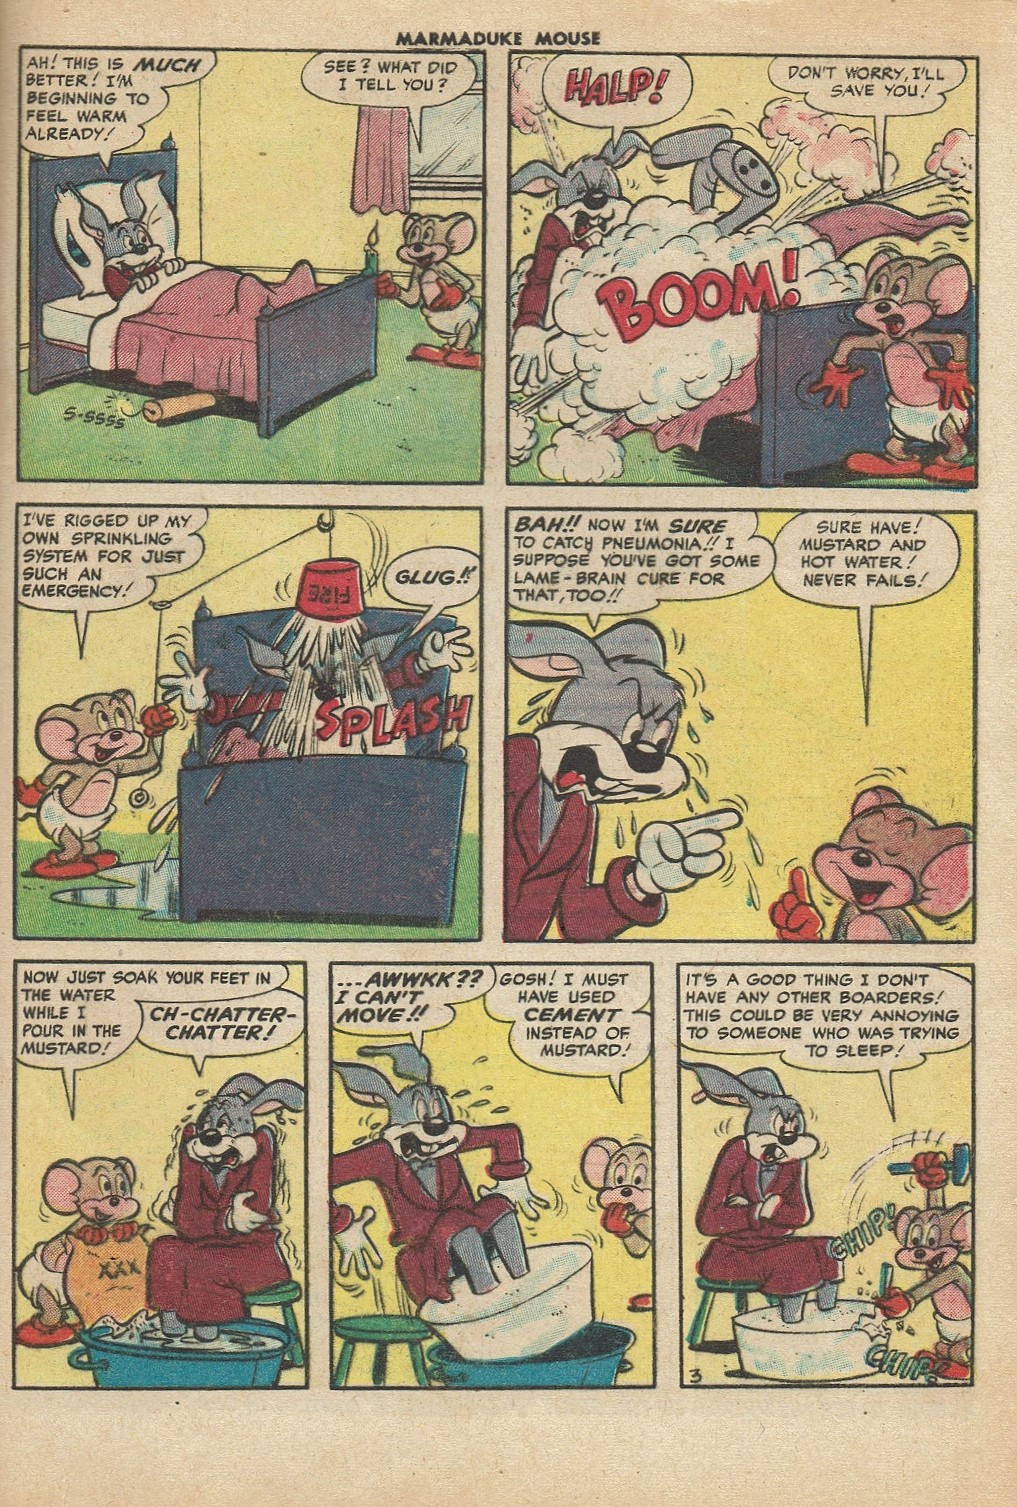 Read online Marmaduke Mouse comic -  Issue #47 - 31